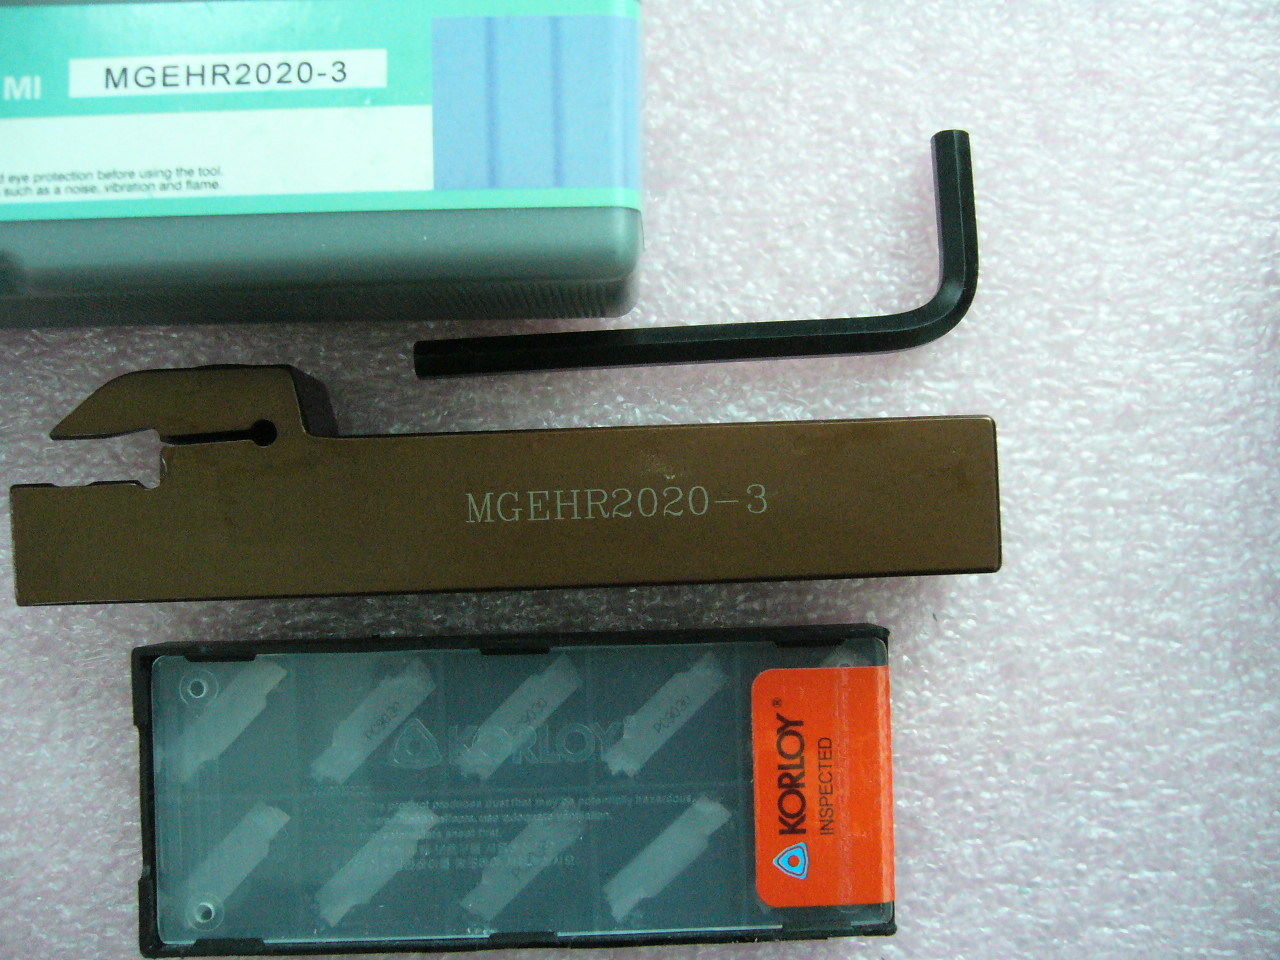 Grooving Parting 3mm Korloy inserts MGMN300-M PC9030 with Toolholder MGEHR2020-3